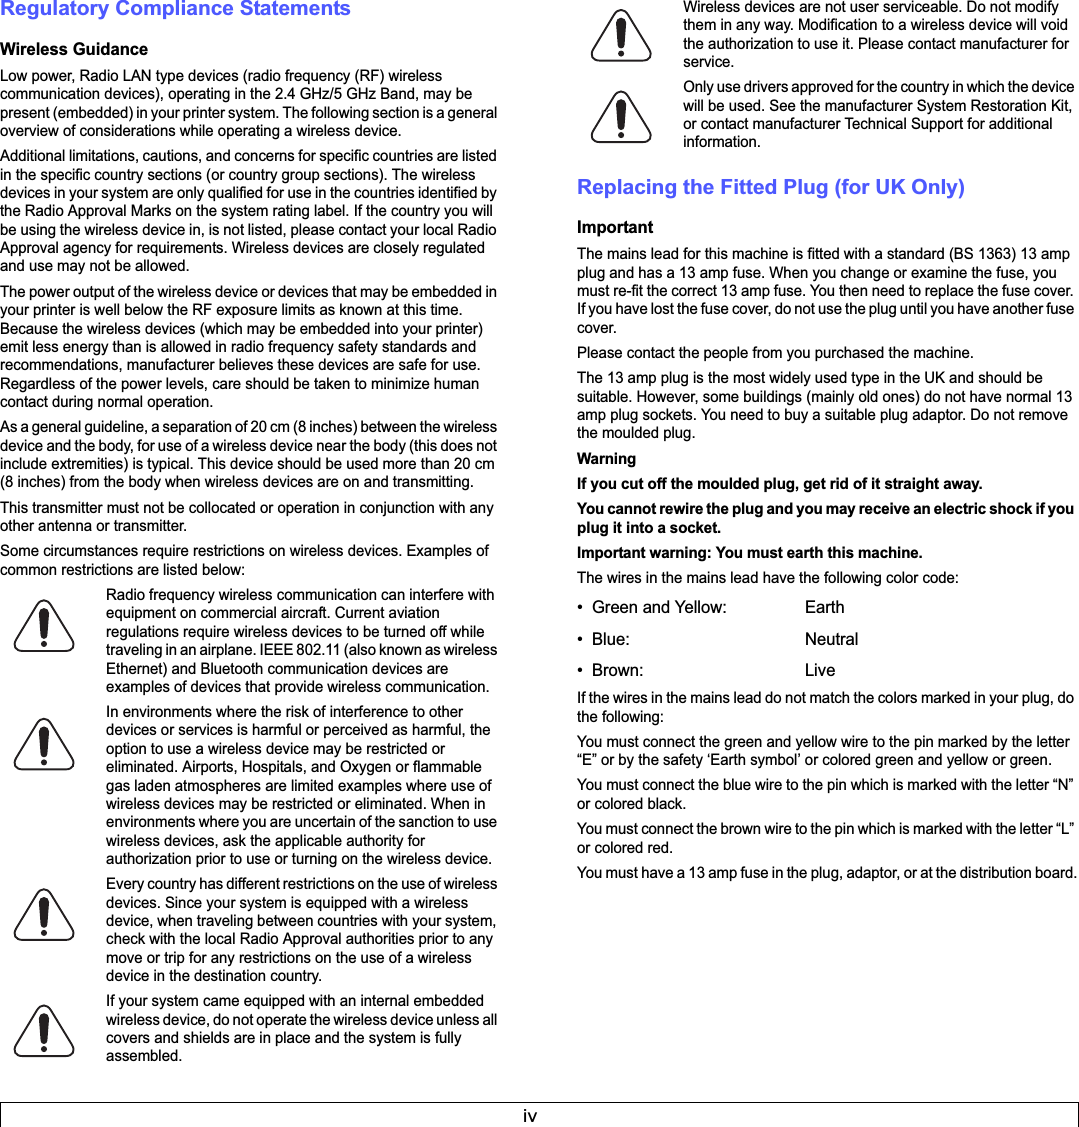 ivRegulatory Compliance StatementsWireless GuidanceLow power, Radio LAN type devices (radio frequency (RF) wireless communication devices), operating in the 2.4 GHz/5 GHz Band, may be present (embedded) in your printer system. The following section is a general overview of considerations while operating a wireless device.Additional limitations, cautions, and concerns for specific countries are listed in the specific country sections (or country group sections). The wireless devices in your system are only qualified for use in the countries identified by the Radio Approval Marks on the system rating label. If the country you will be using the wireless device in, is not listed, please contact your local Radio Approval agency for requirements. Wireless devices are closely regulated and use may not be allowed.The power output of the wireless device or devices that may be embedded in your printer is well below the RF exposure limits as known at this time. Because the wireless devices (which may be embedded into your printer) emit less energy than is allowed in radio frequency safety standards and recommendations, manufacturer believes these devices are safe for use. Regardless of the power levels, care should be taken to minimize human contact during normal operation.As a general guideline, a separation of 20 cm (8 inches) between the wireless device and the body, for use of a wireless device near the body (this does not include extremities) is typical. This device should be used more than 20 cm (8 inches) from the body when wireless devices are on and transmitting.This transmitter must not be collocated or operation in conjunction with any other antenna or transmitter.Some circumstances require restrictions on wireless devices. Examples of common restrictions are listed below:Radio frequency wireless communication can interfere with equipment on commercial aircraft. Current aviation regulations require wireless devices to be turned off while traveling in an airplane. IEEE 802.11 (also known as wireless Ethernet) and Bluetooth communication devices are examples of devices that provide wireless communication.In environments where the risk of interference to other devices or services is harmful or perceived as harmful, the option to use a wireless device may be restricted or eliminated. Airports, Hospitals, and Oxygen or flammable gas laden atmospheres are limited examples where use of wireless devices may be restricted or eliminated. When in environments where you are uncertain of the sanction to use wireless devices, ask the applicable authority for authorization prior to use or turning on the wireless device.Every country has different restrictions on the use of wireless devices. Since your system is equipped with a wireless device, when traveling between countries with your system, check with the local Radio Approval authorities prior to any move or trip for any restrictions on the use of a wireless device in the destination country.If your system came equipped with an internal embedded wireless device, do not operate the wireless device unless all covers and shields are in place and the system is fully assembled.Wireless devices are not user serviceable. Do not modify them in any way. Modification to a wireless device will void the authorization to use it. Please contact manufacturer for service.Only use drivers approved for the country in which the device will be used. See the manufacturer System Restoration Kit, or contact manufacturer Technical Support for additional information.Replacing the Fitted Plug (for UK Only)ImportantThe mains lead for this machine is fitted with a standard (BS 1363) 13 amp plug and has a 13 amp fuse. When you change or examine the fuse, you must re-fit the correct 13 amp fuse. You then need to replace the fuse cover. If you have lost the fuse cover, do not use the plug until you have another fuse cover. Please contact the people from you purchased the machine.The 13 amp plug is the most widely used type in the UK and should be suitable. However, some buildings (mainly old ones) do not have normal 13 amp plug sockets. You need to buy a suitable plug adaptor. Do not remove the moulded plug.WarningIf you cut off the moulded plug, get rid of it straight away.You cannot rewire the plug and you may receive an electric shock if you plug it into a socket.Important warning: You must earth this machine.The wires in the mains lead have the following color code:• Green and Yellow:  Earth• Blue: Neutral•Brown: LiveIf the wires in the mains lead do not match the colors marked in your plug, do the following:You must connect the green and yellow wire to the pin marked by the letter “E” or by the safety ‘Earth symbol’ or colored green and yellow or green.You must connect the blue wire to the pin which is marked with the letter “N” or colored black.You must connect the brown wire to the pin which is marked with the letter “L” or colored red.You must have a 13 amp fuse in the plug, adaptor, or at the distribution board.